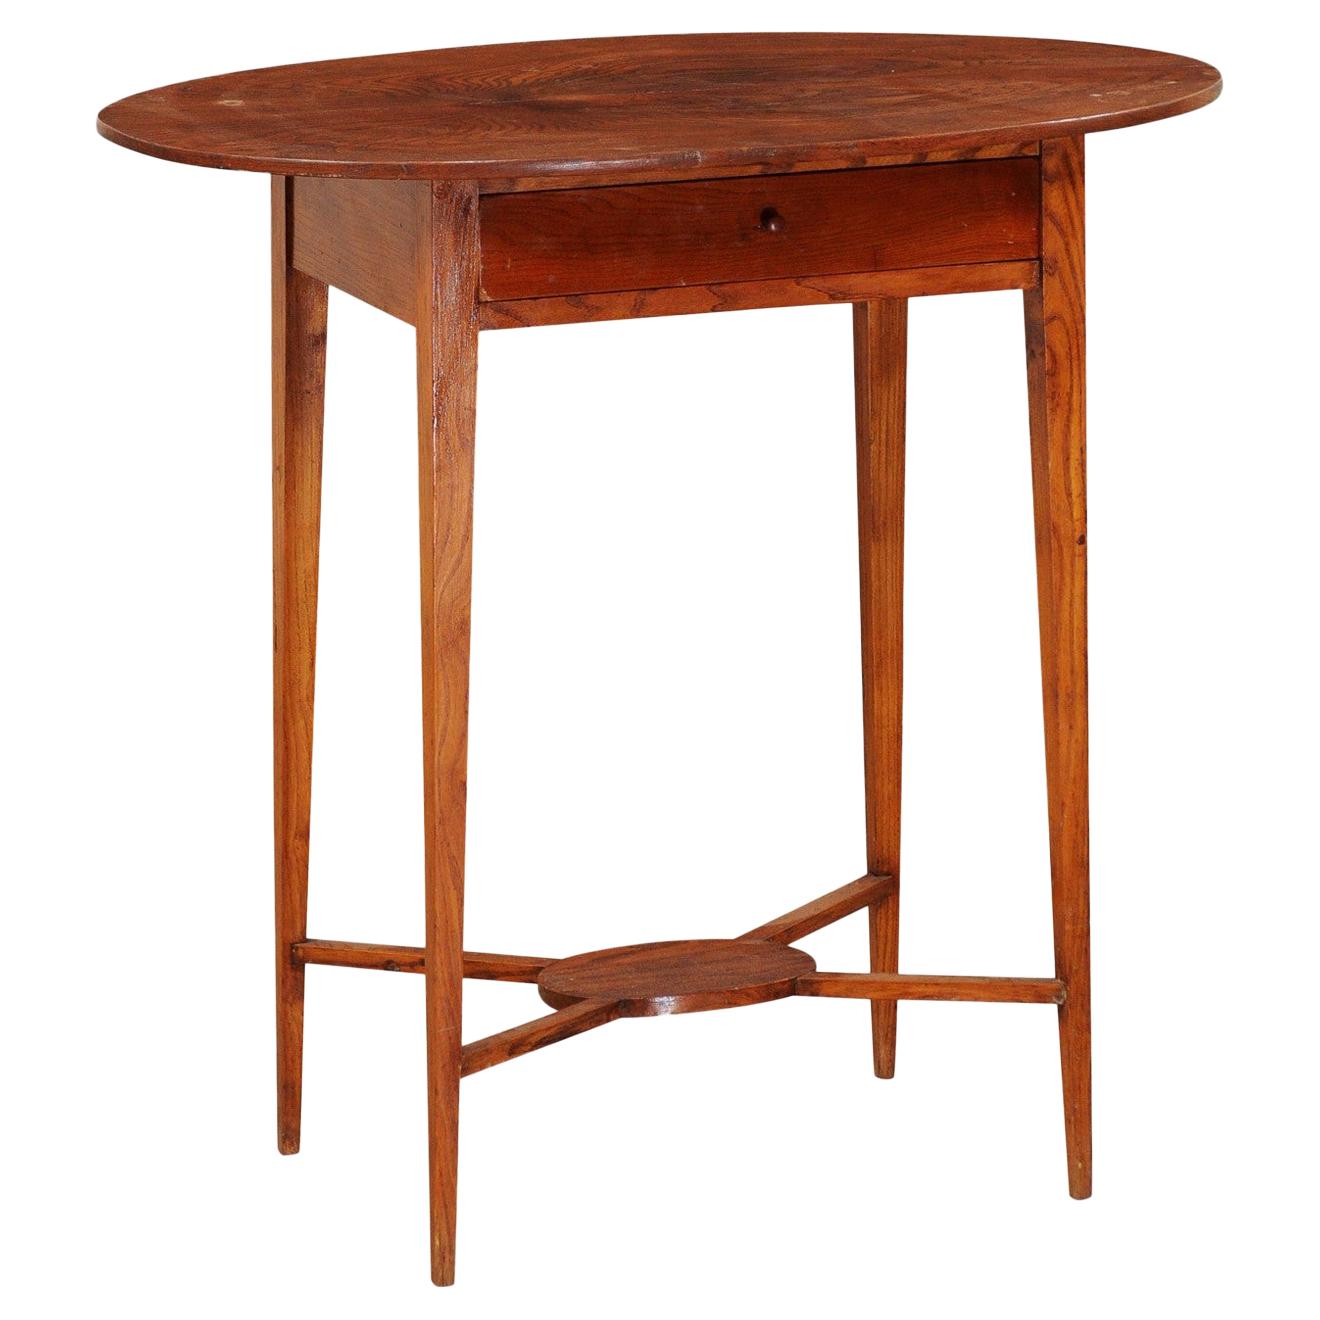 Swedish Elm Wood Table with Oval-Shaped Wide Top and Single Drawer